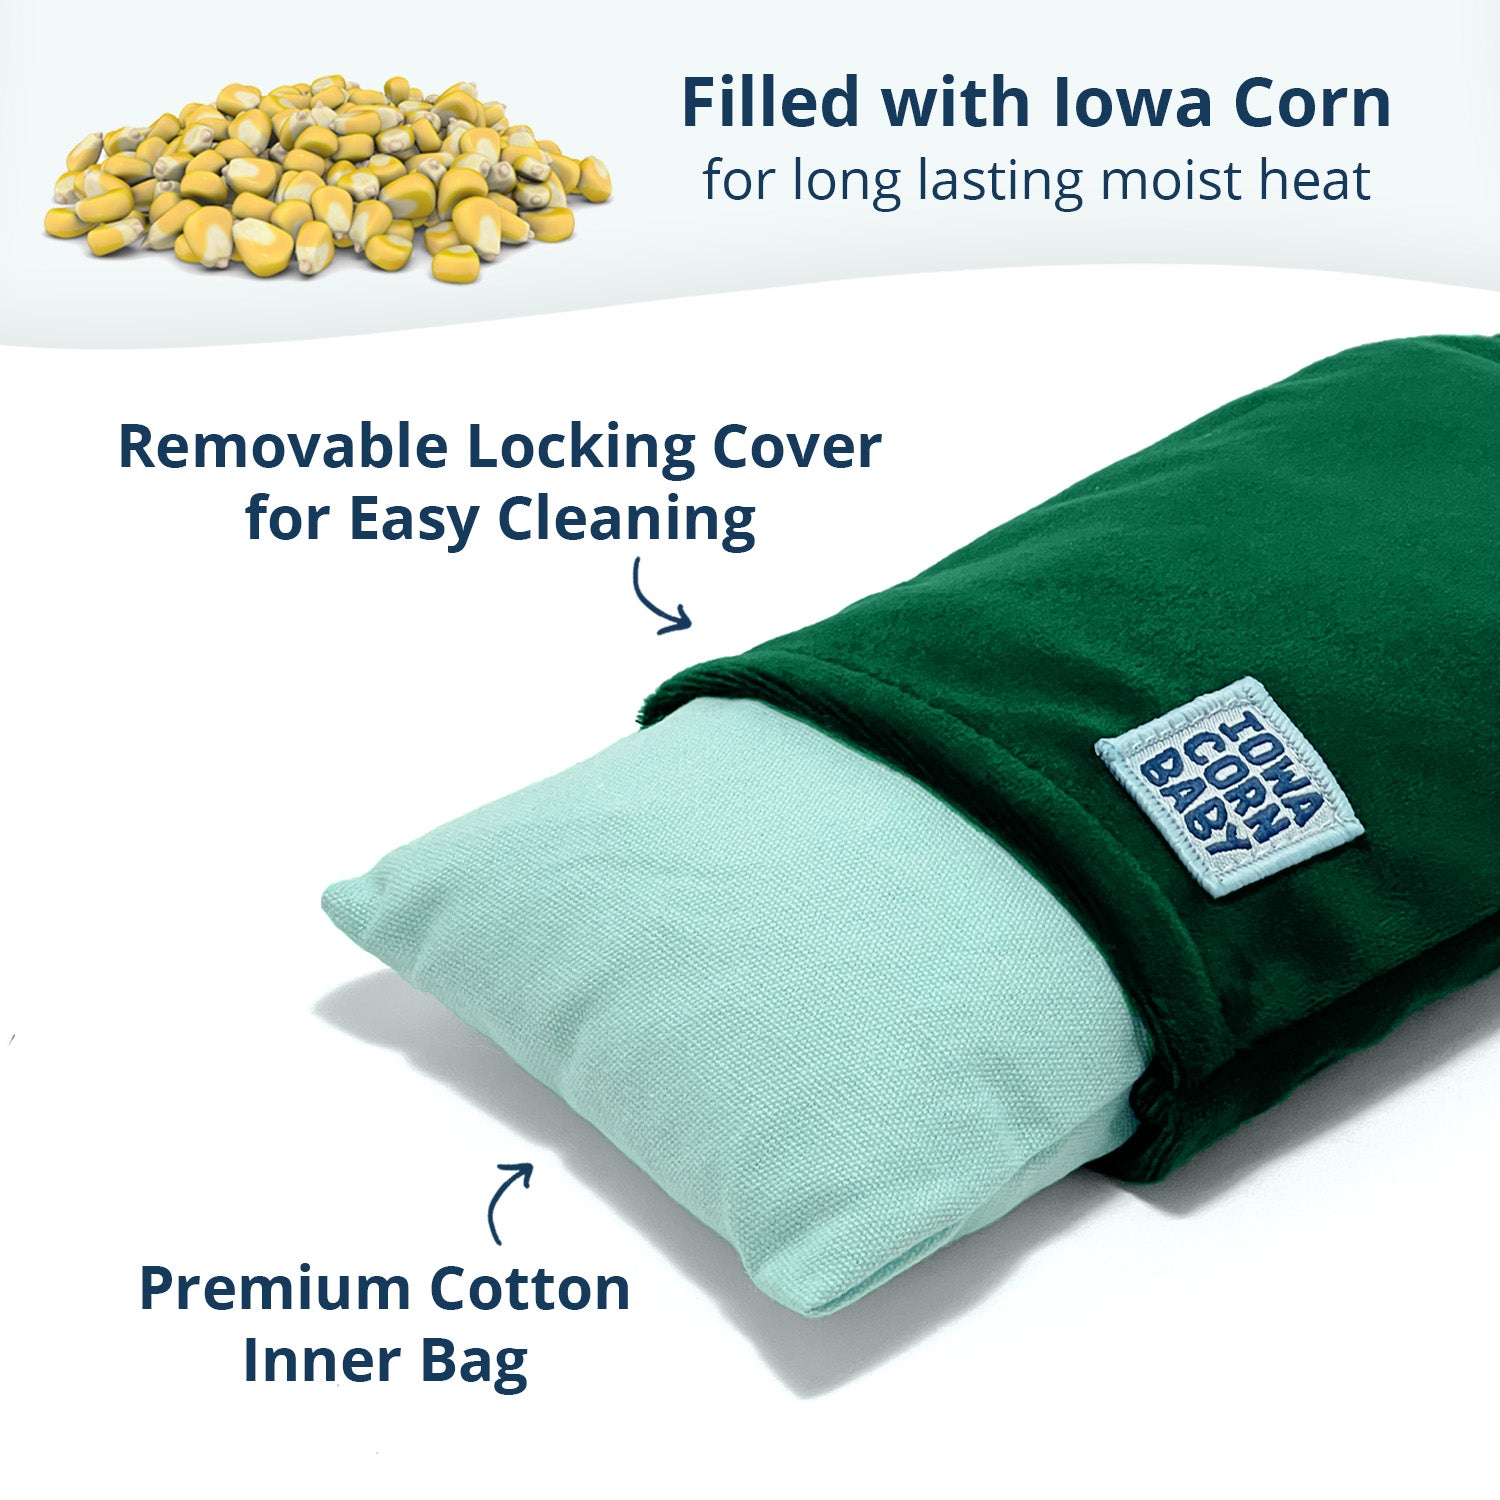 Large Corn Bag - Color Explosion - Hot and Cold Therapy, Moist